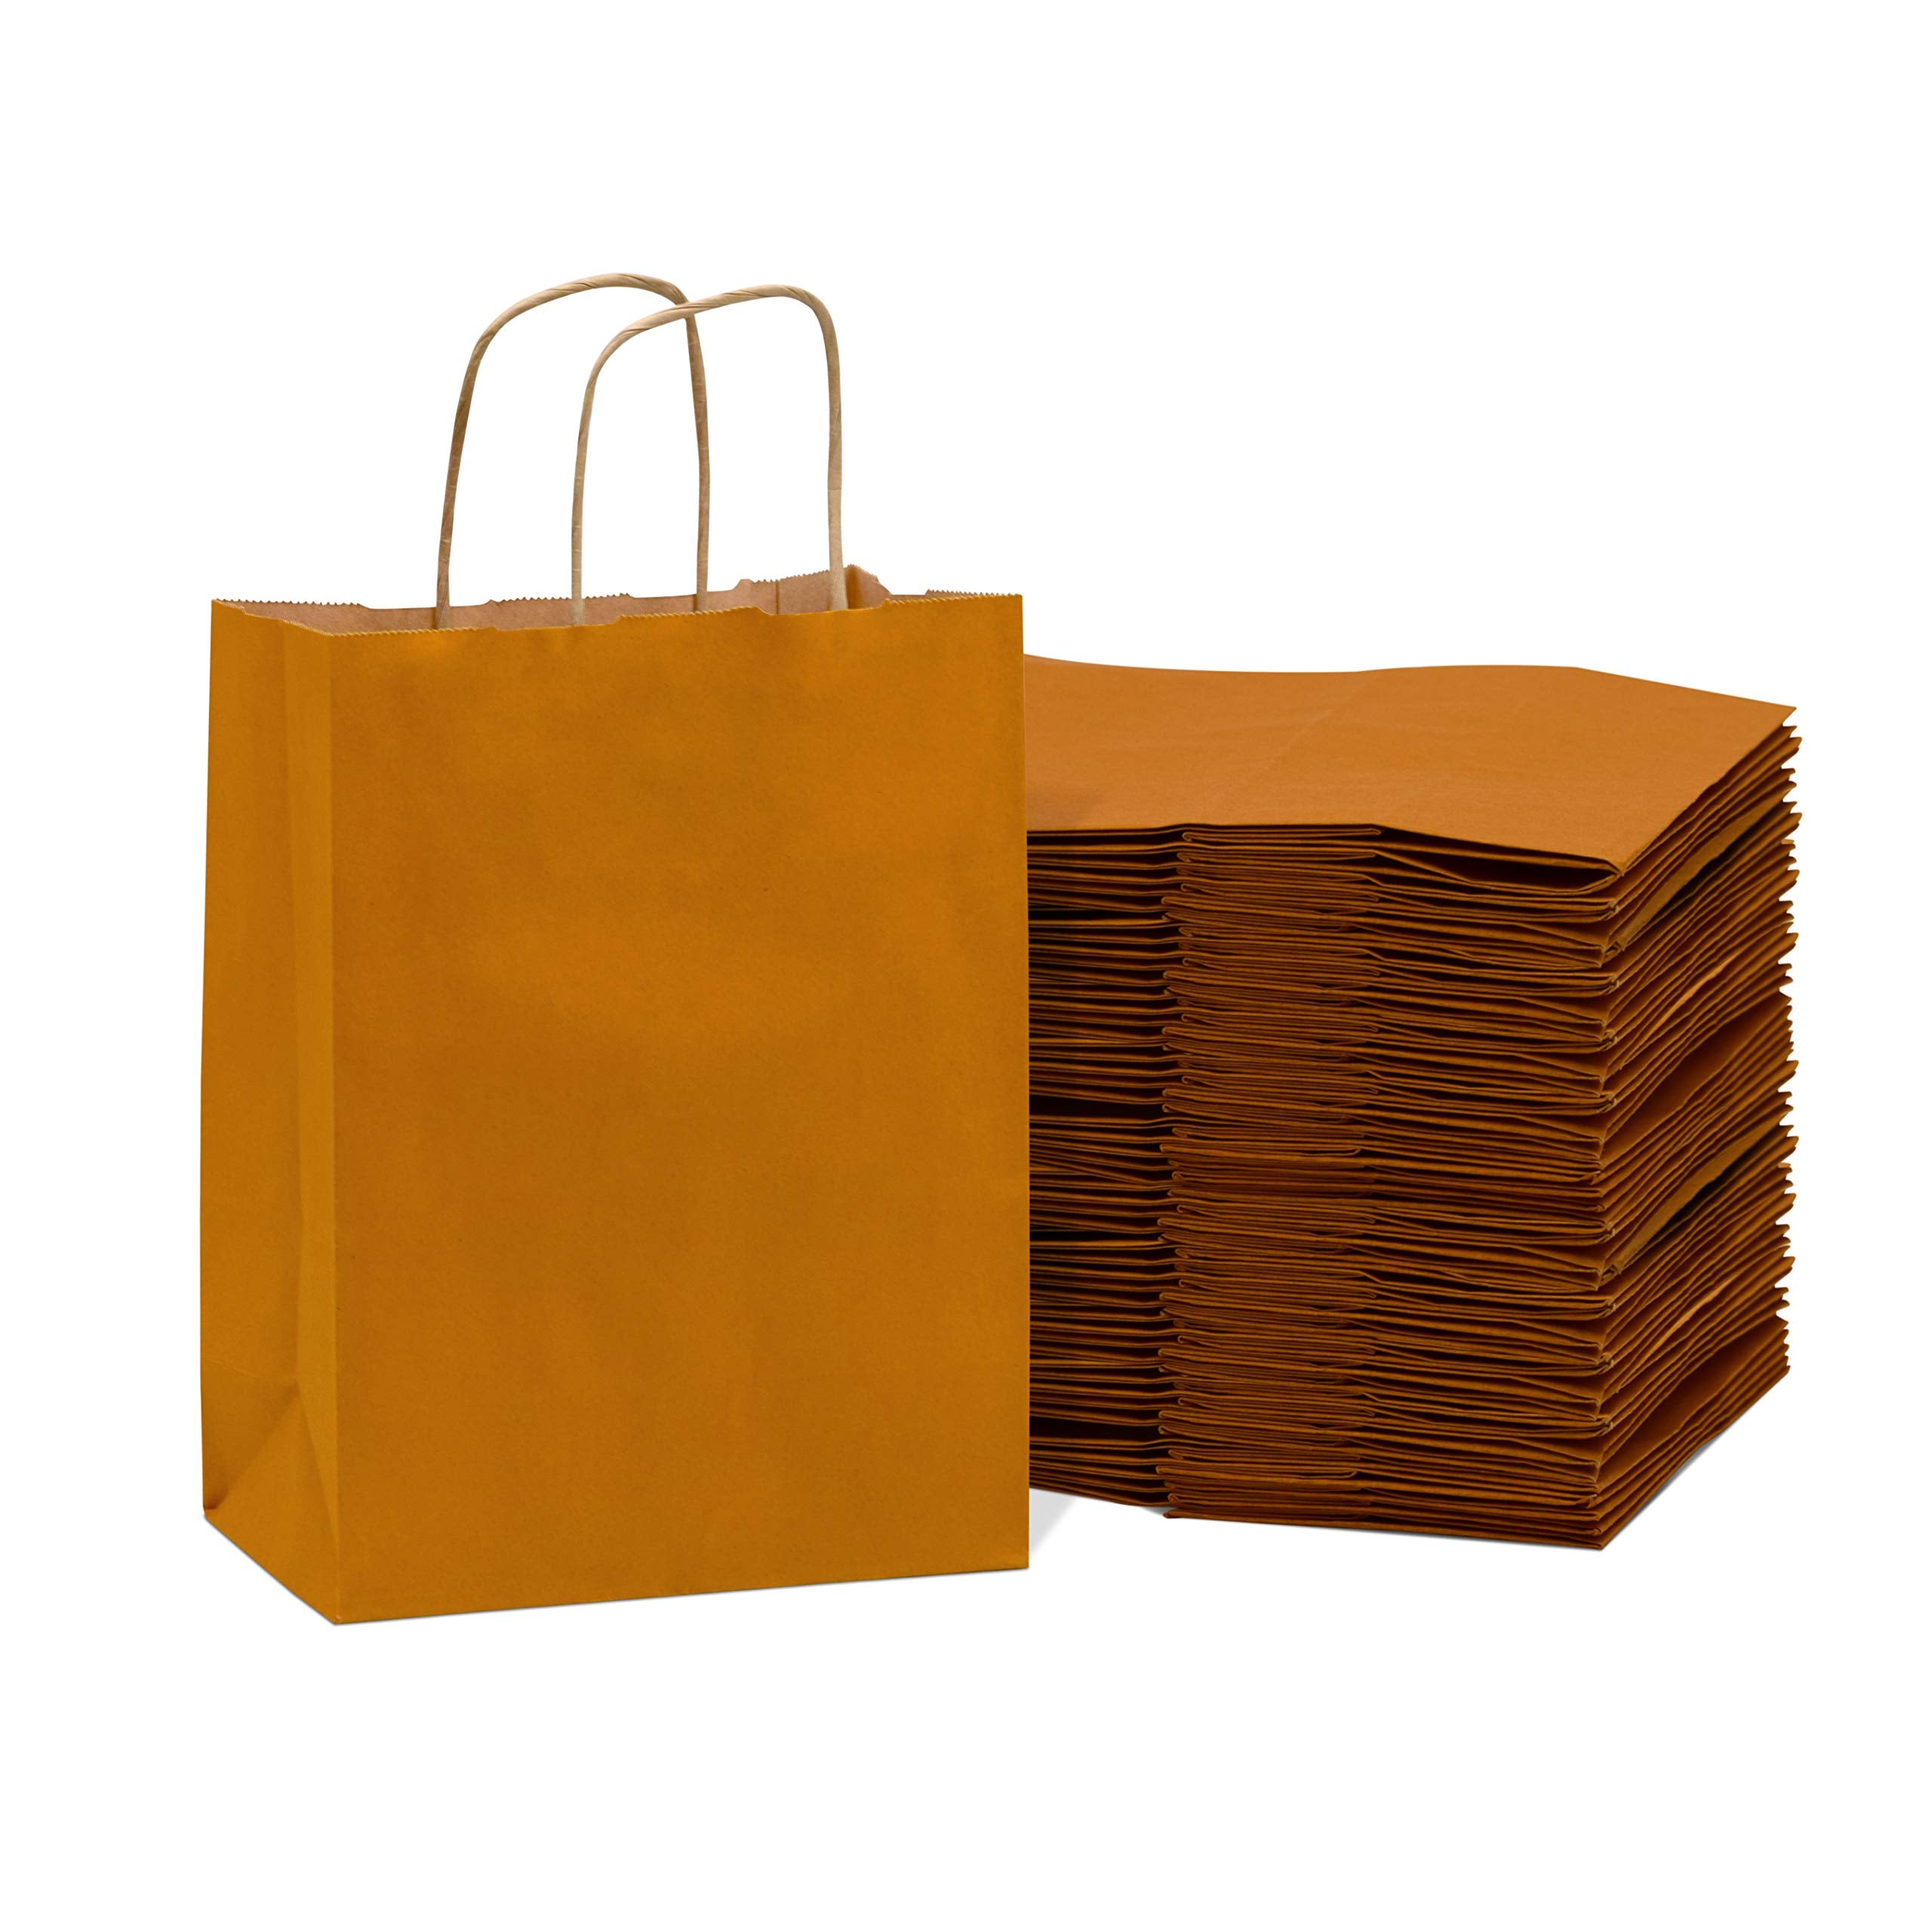 Orange Gift Bags - 8x4x10 Inch 50 Pack Kraft Paper Shopping Bags with Handles, Small Craft Totes in Bulk for Boutiques, Small Business, Retail Stores, Birthday Parties, Jewelry, Merchandise, Bulk  - Like New